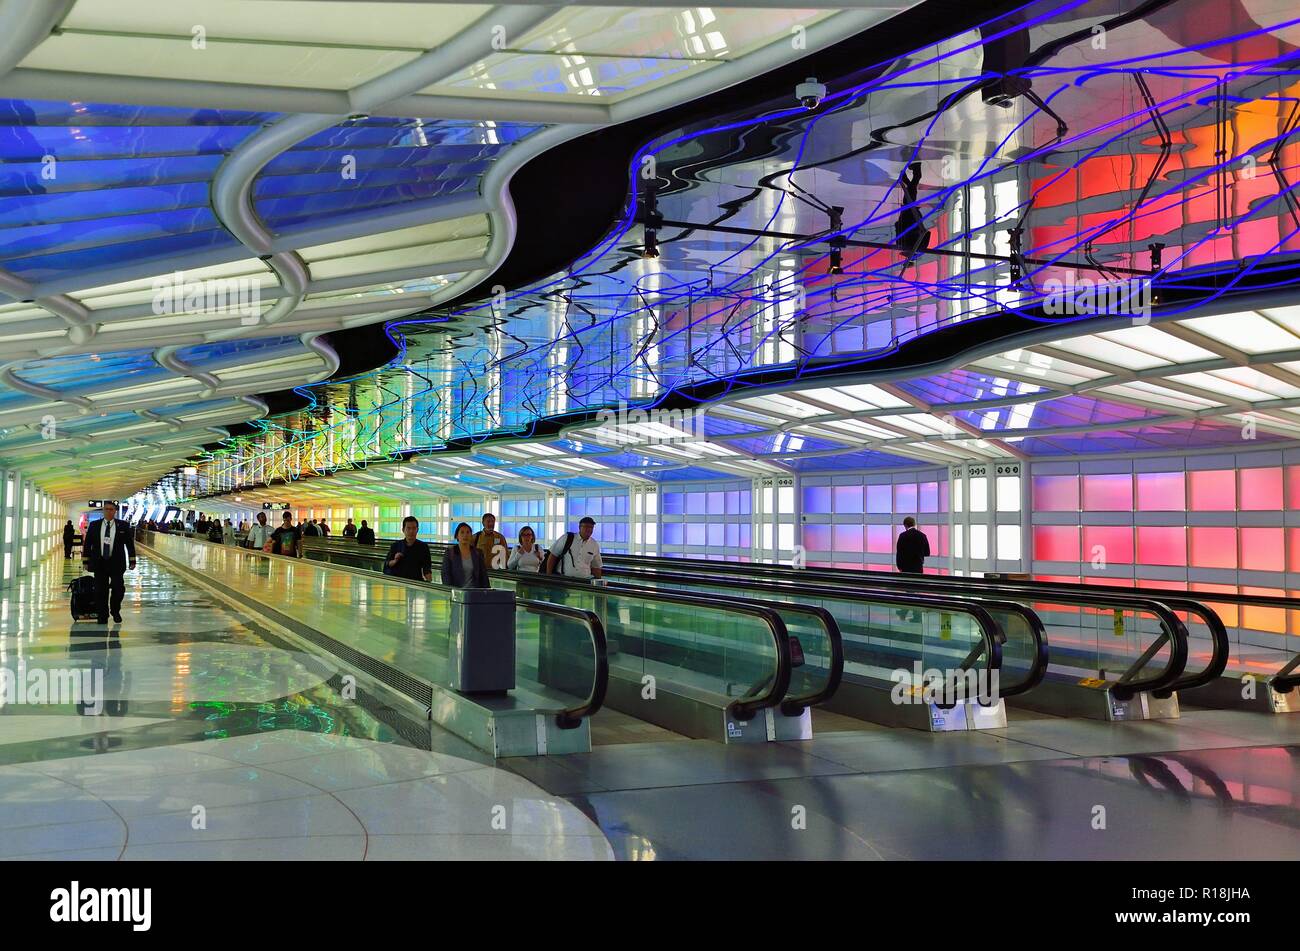 Chicago, Illinois, USA. The colorfully appointed tunnel passageway connecting two United Airlines terminals at O'Hare International Airport. Stock Photo